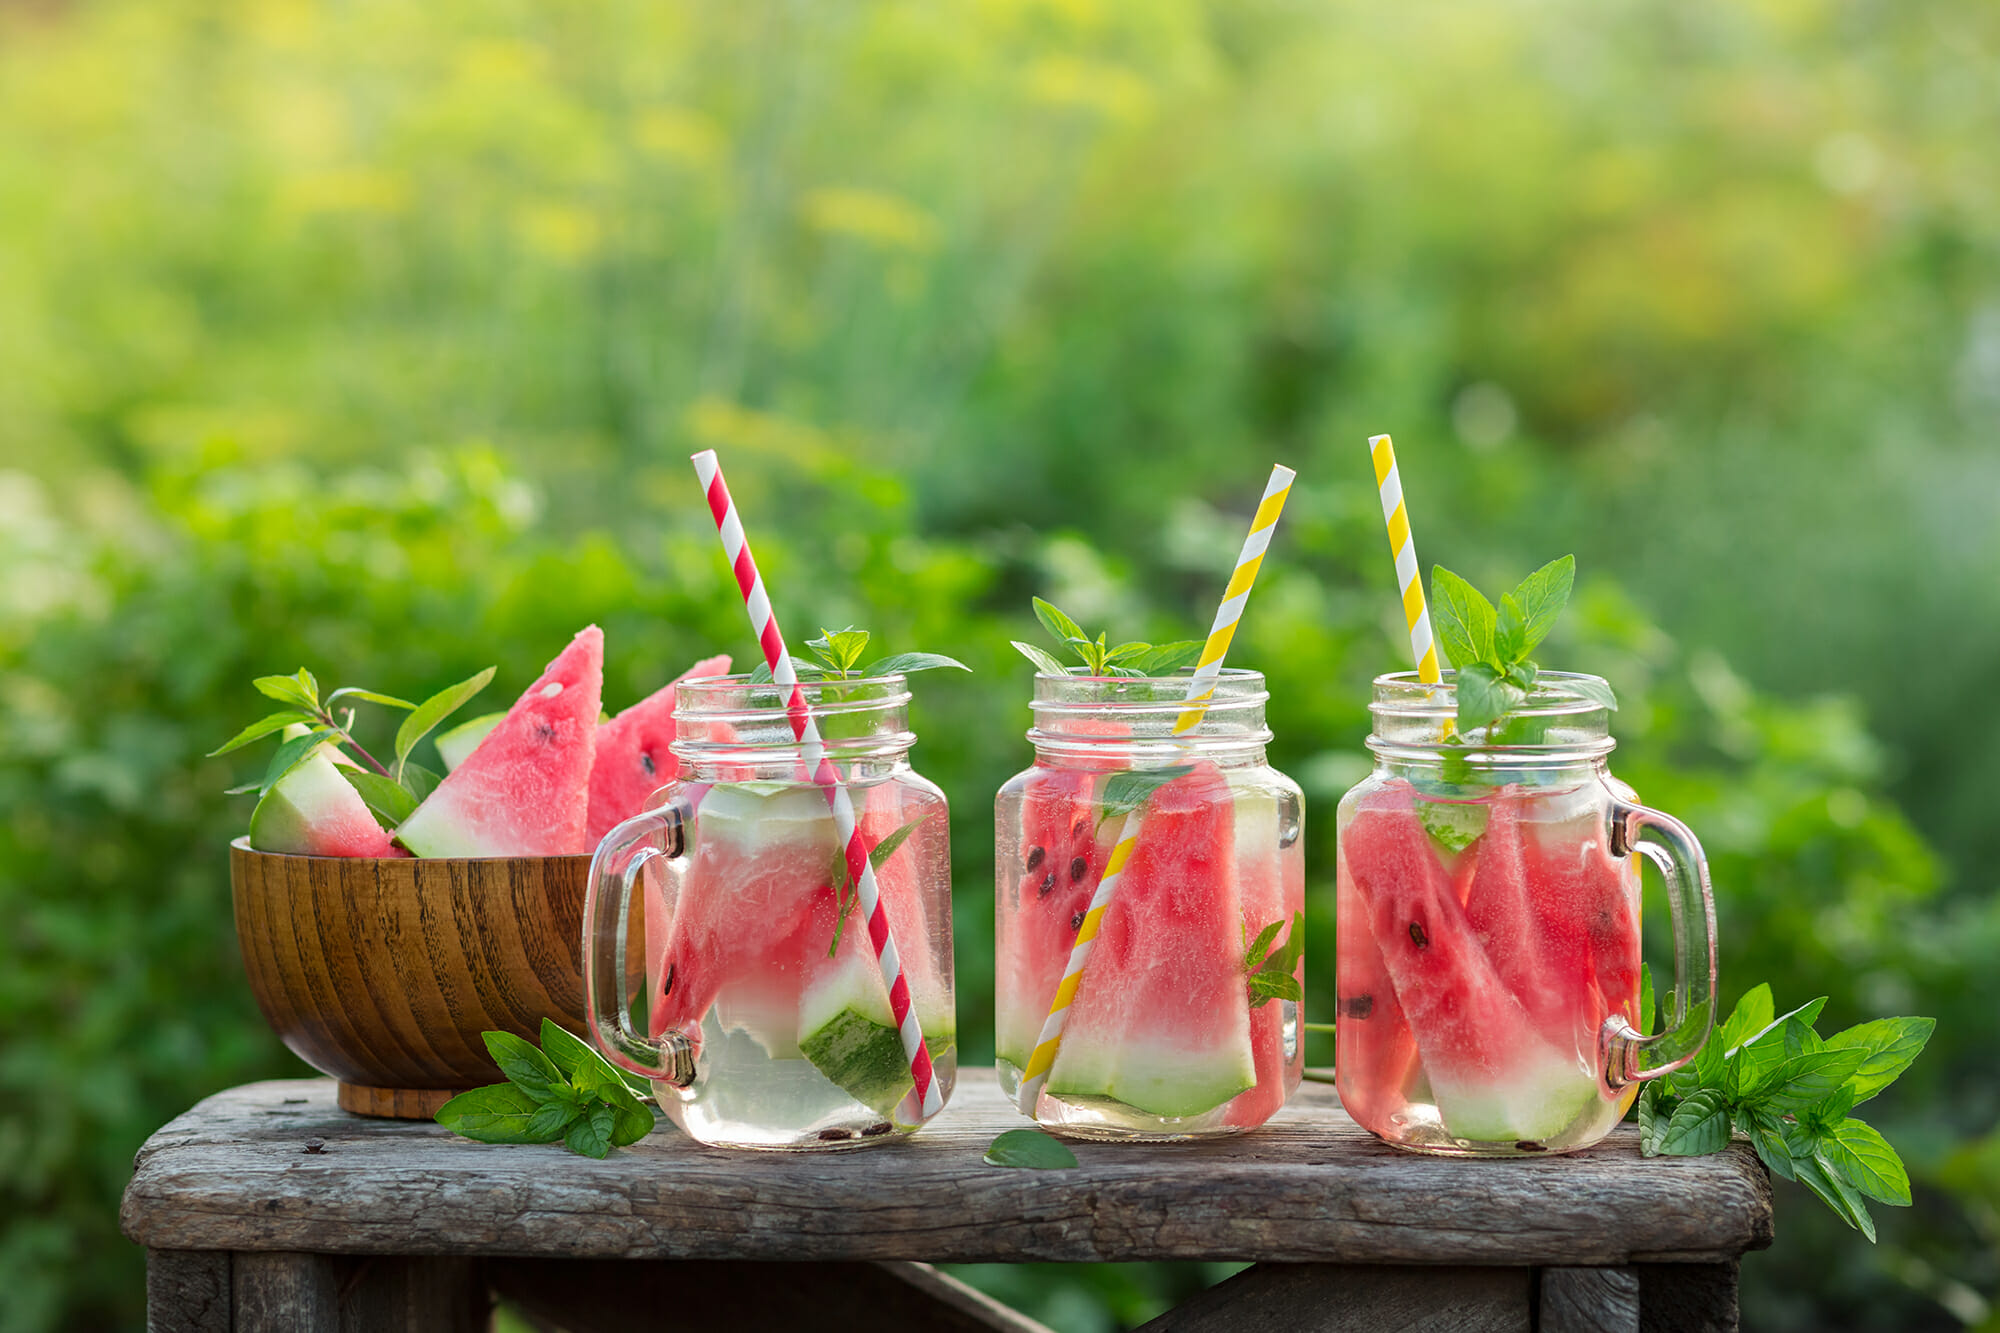 Watermelon and Mint infused water